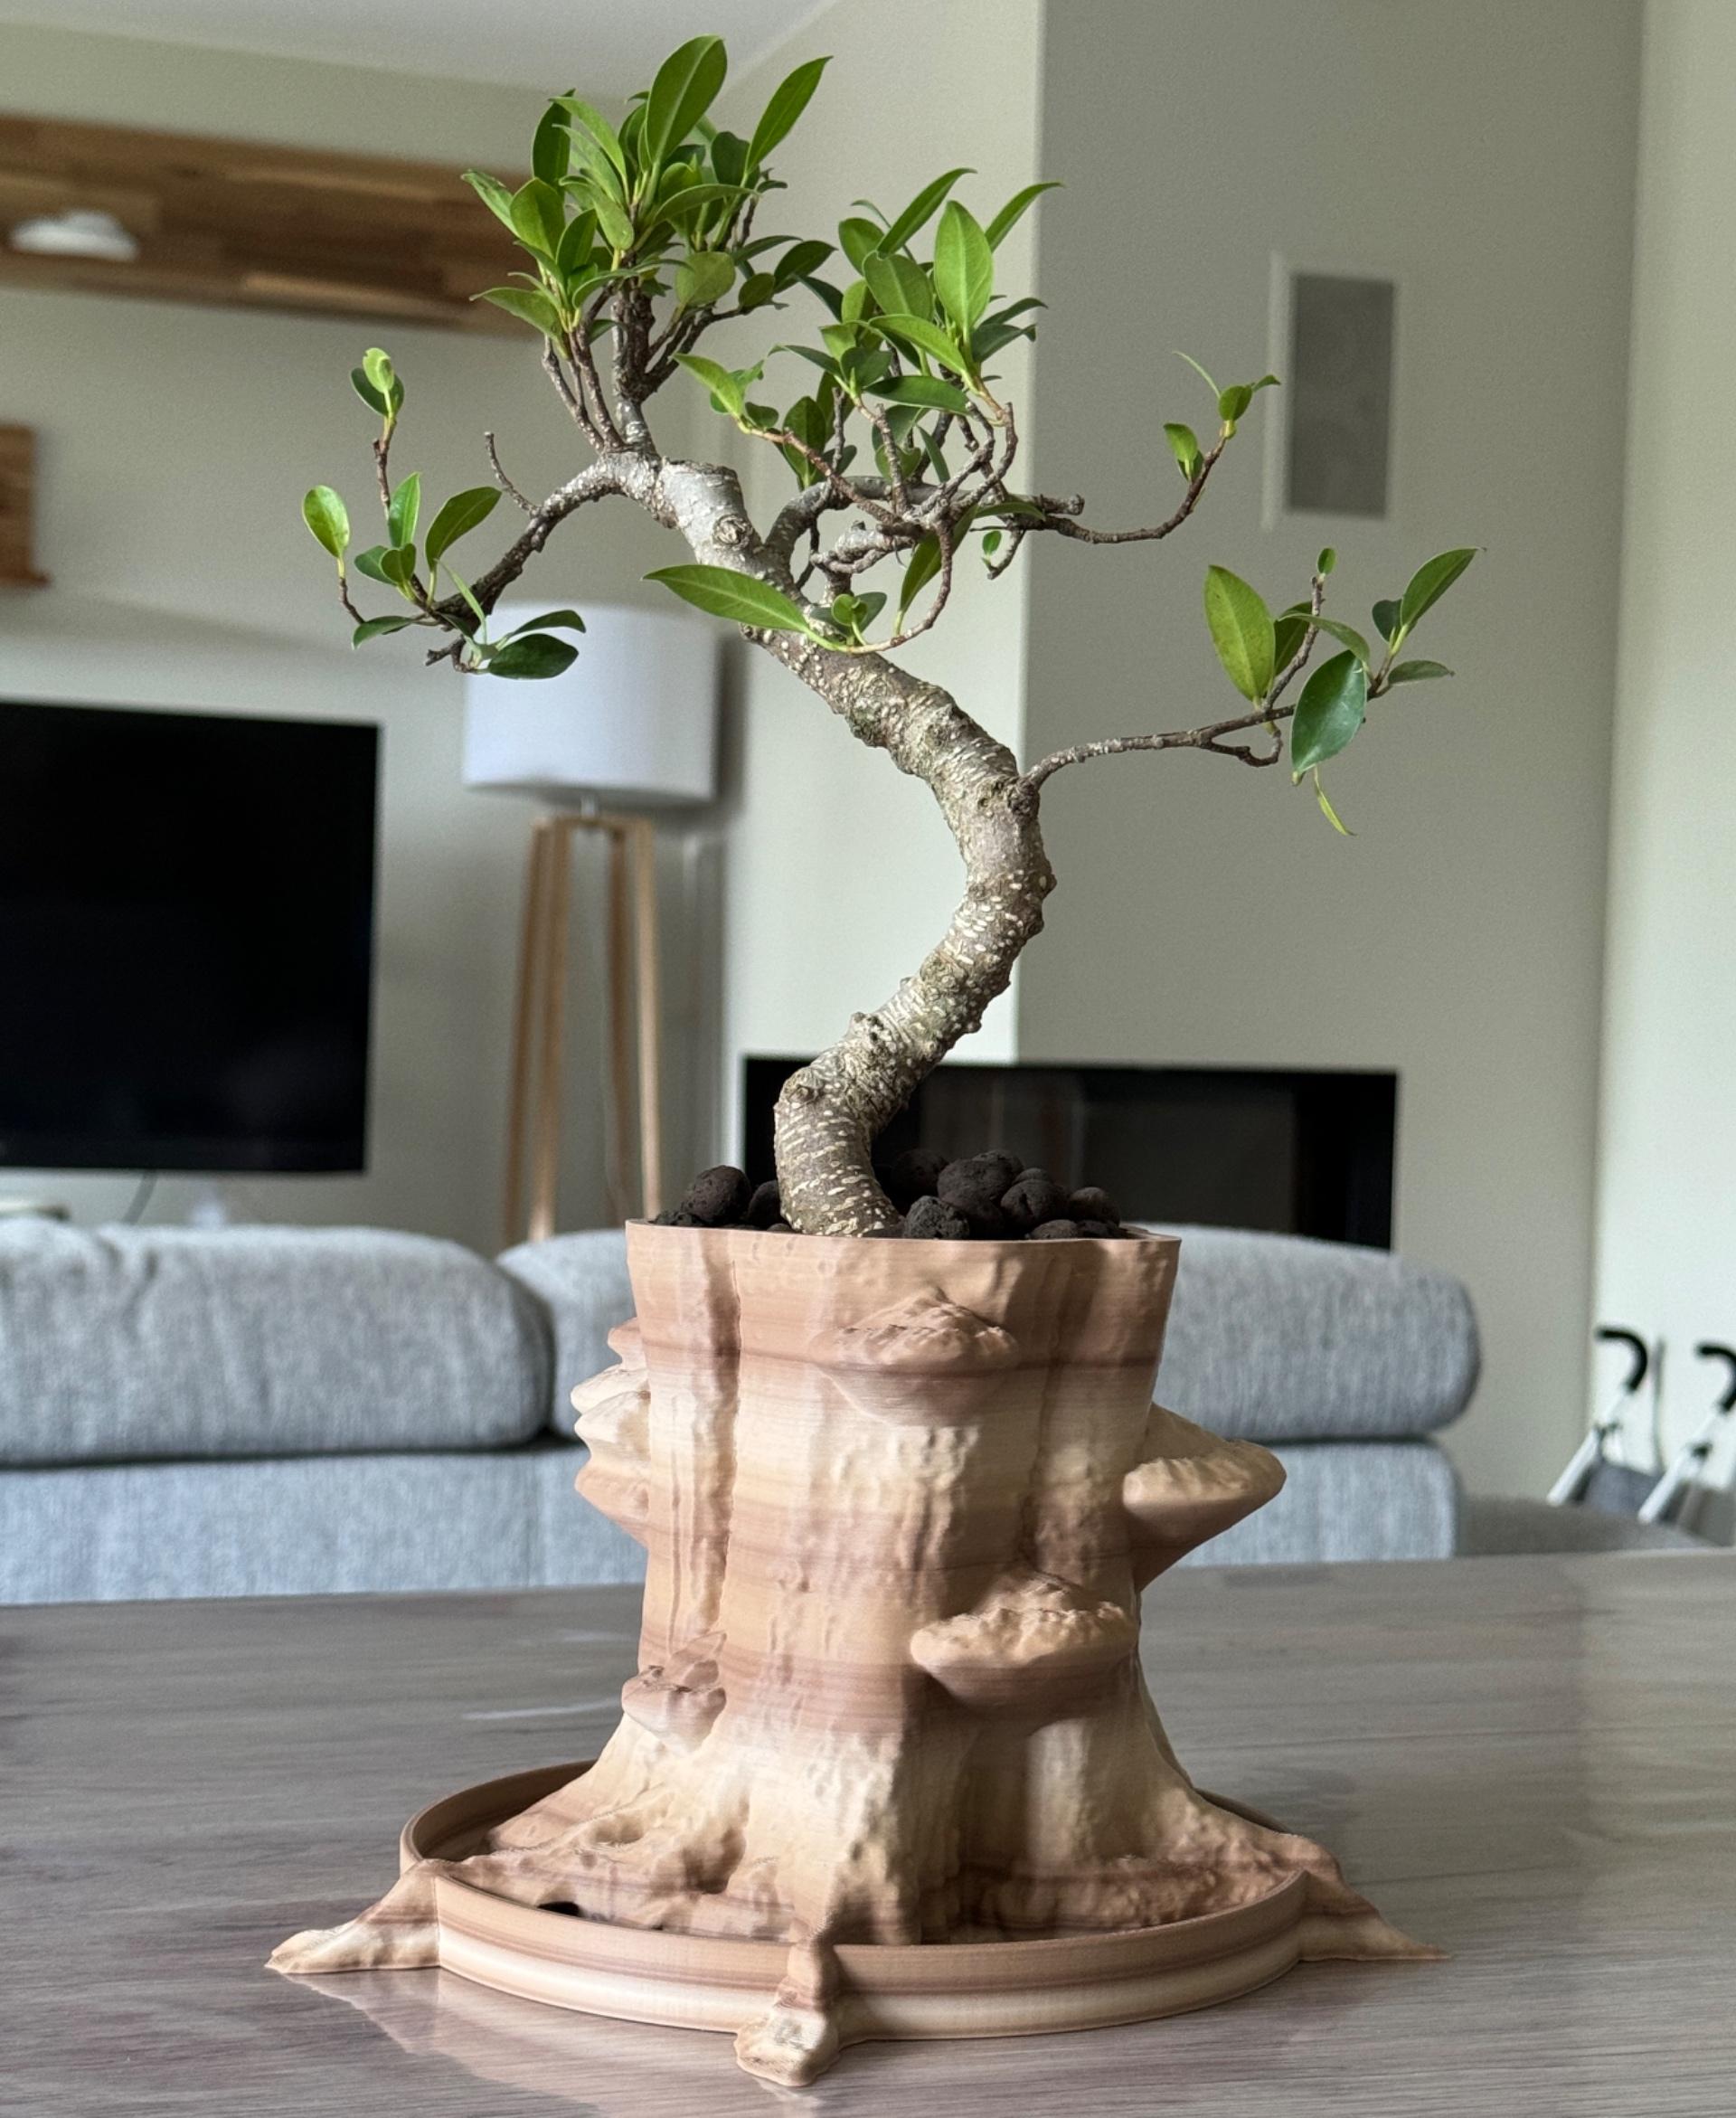 Planter “Sylvatica Tree” - Incredible planter with wood like filament for a Bonsai - 3d model